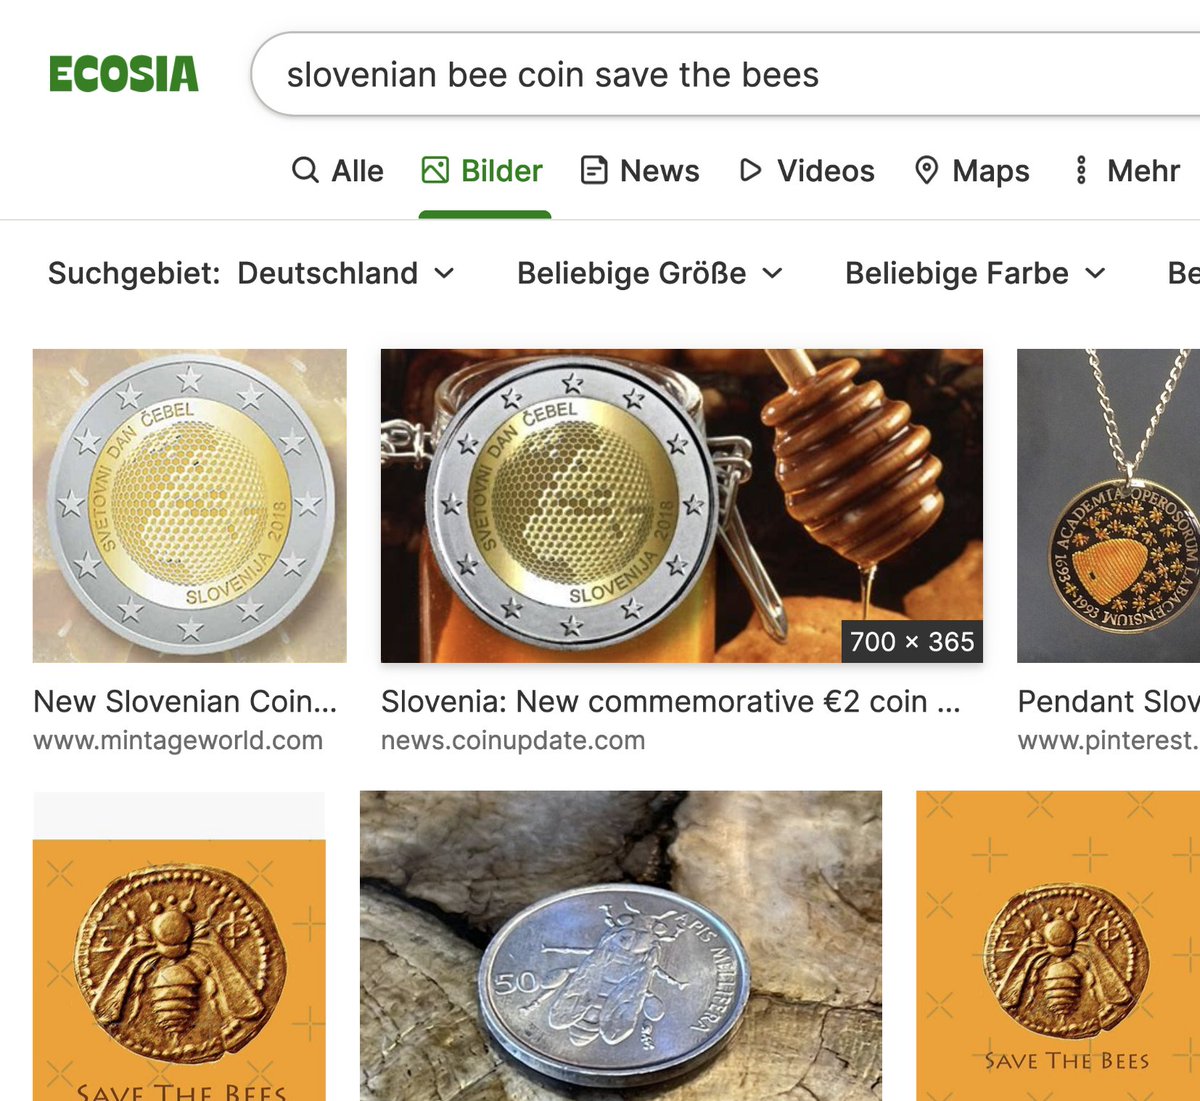 #WOW! Seen this?

THANK U for #inspiration ☑️🐝@BeeAsMarine:
Just #discovered ecosia.org/images?q=slove…

#Slovenia has #supercool #BEE #euro #coins.

#collectors HELP the #POLLEN COLLECTORS too!
SO easy:

😉👍🐝 change.org/p/linkedin-let…

@ecosia #twlz #generationrestoration #čebele